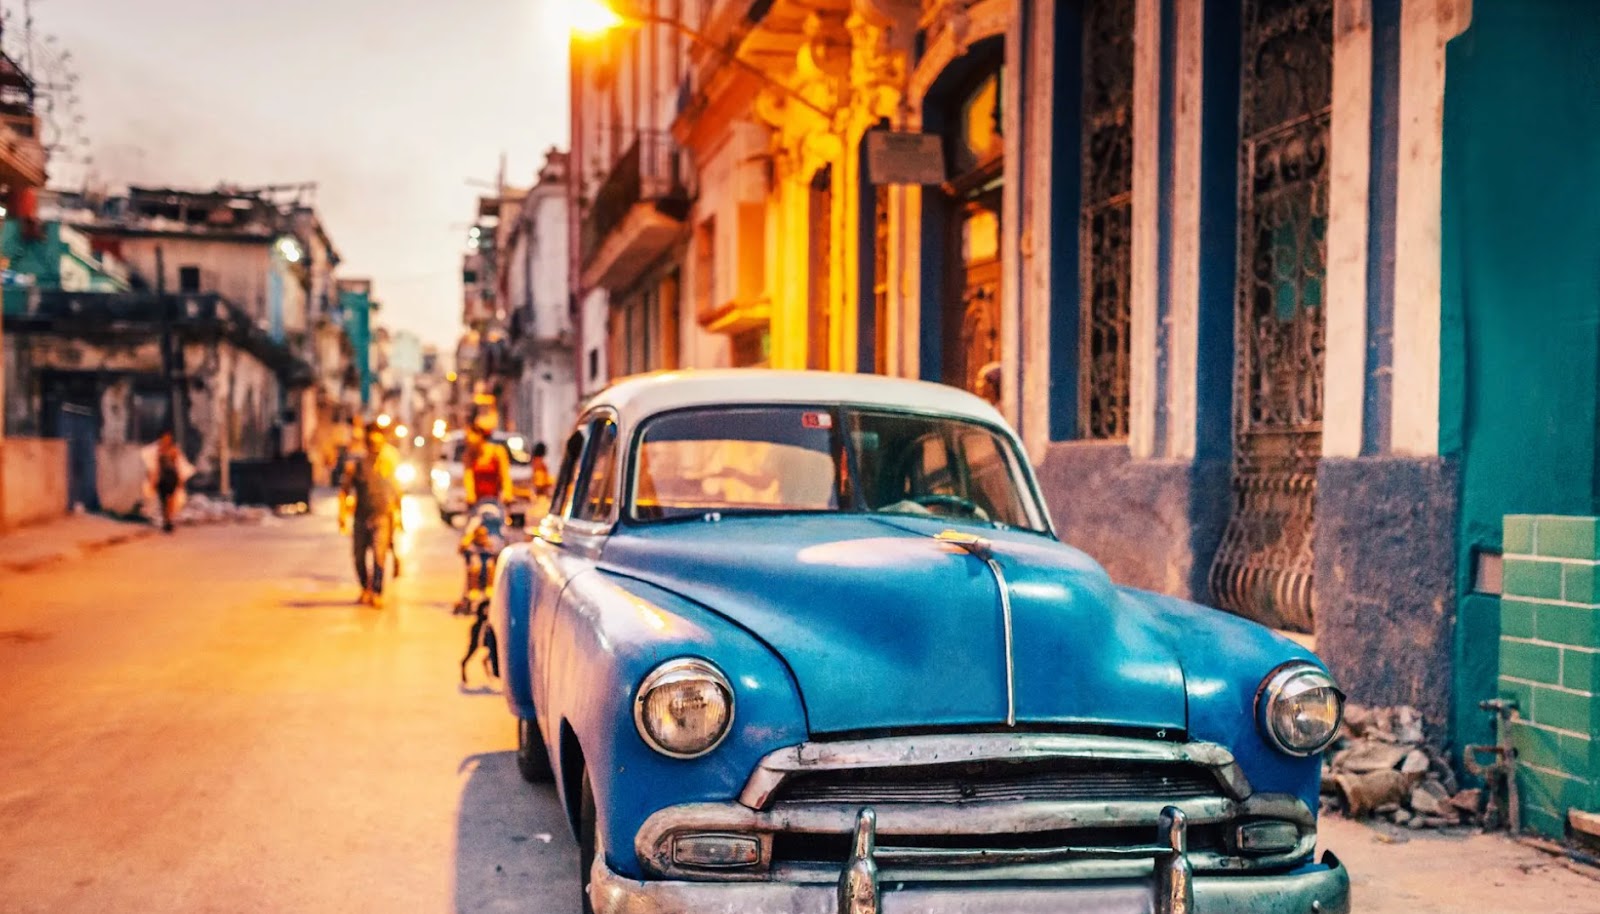 Havana Syndrome: 7 Chilling Theories About What's Behind the Mystery Illness